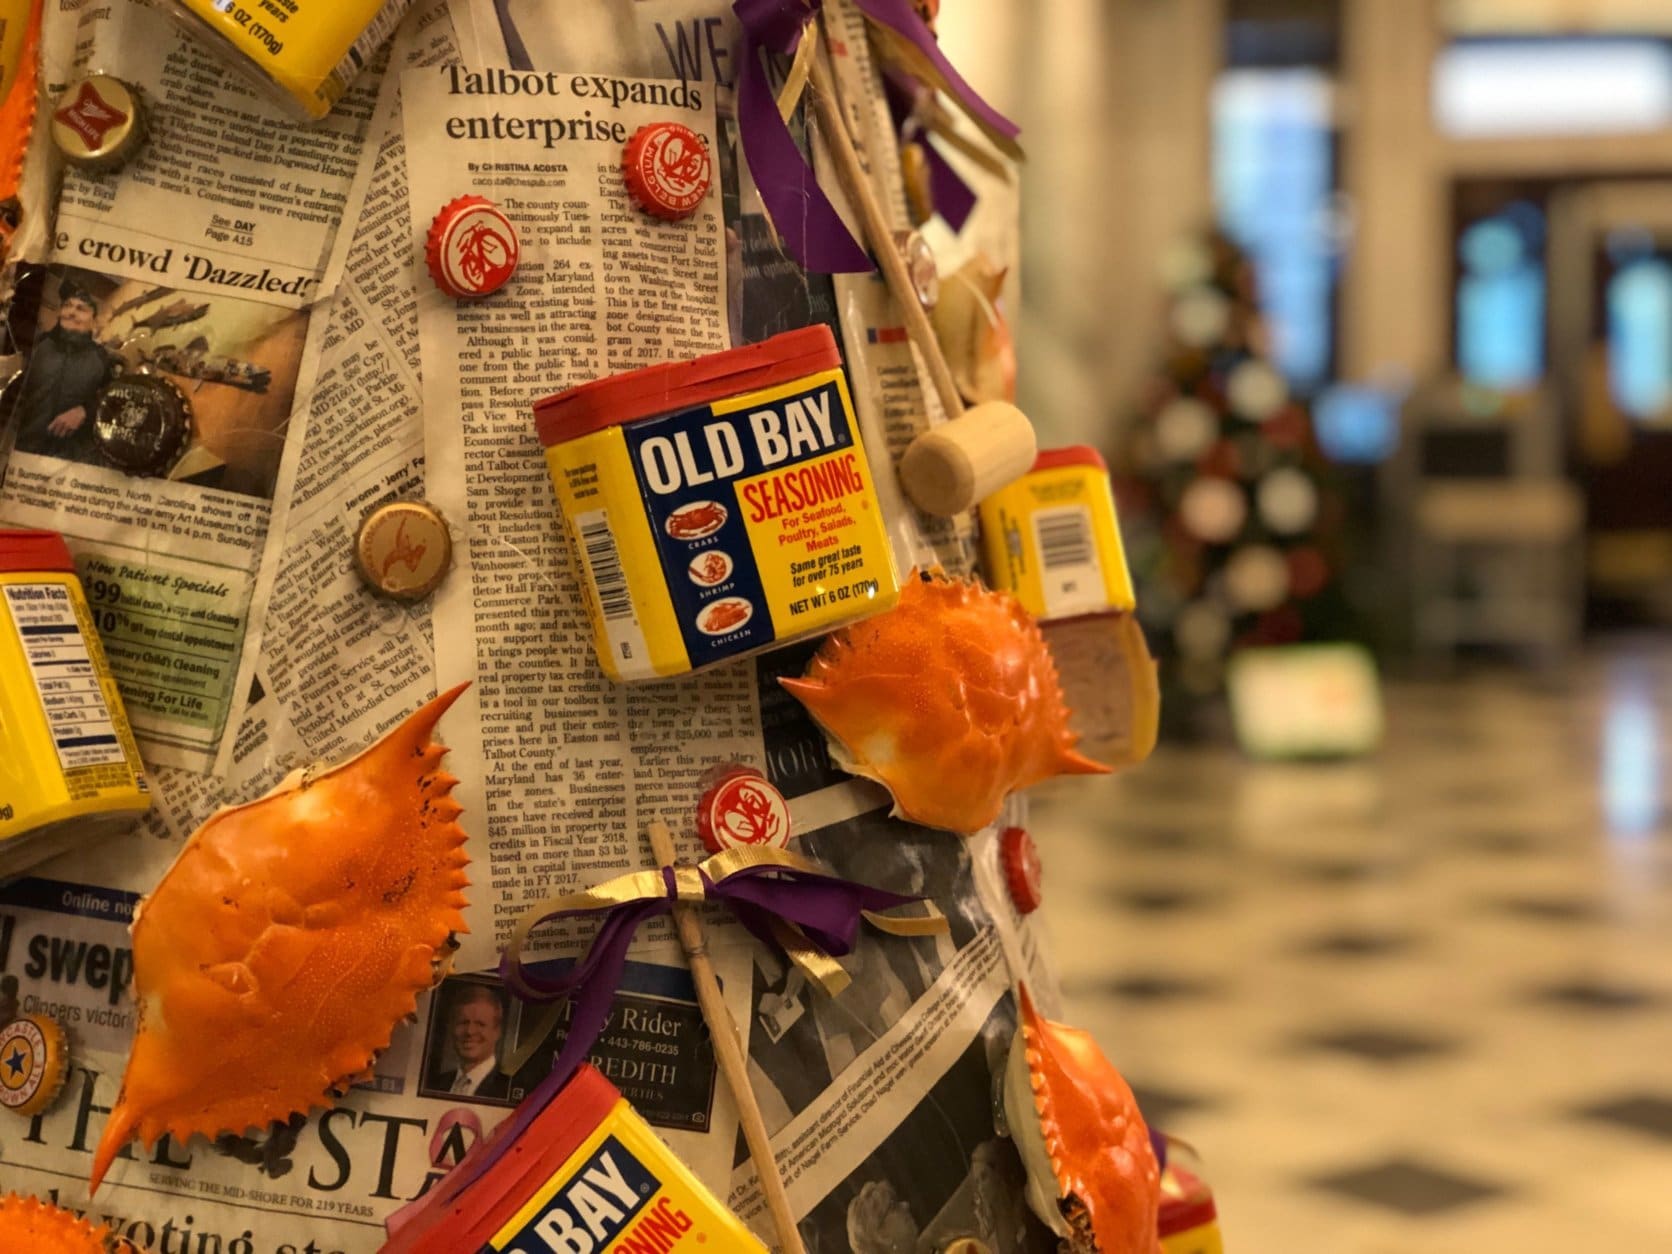 photo of a tree decorated with Old Bay tins, crabs and newspaper